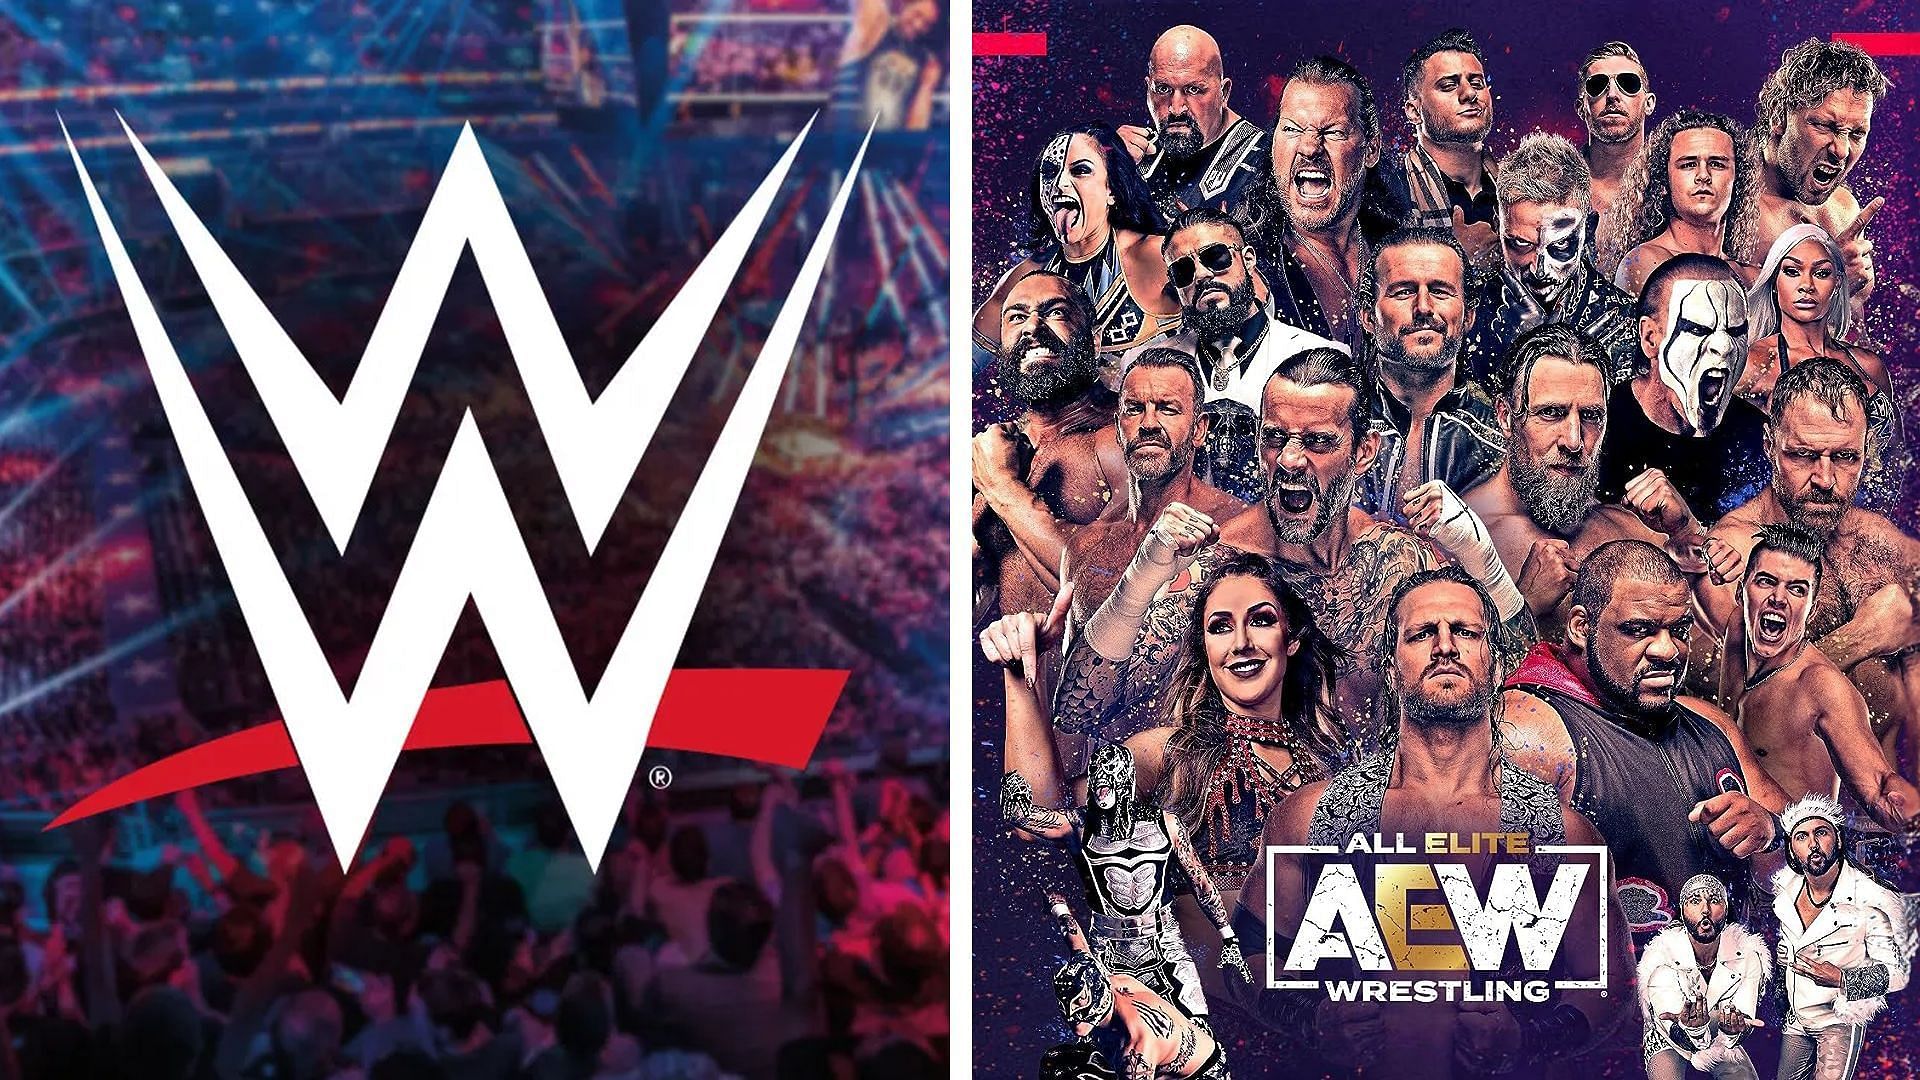 AEW has built an impressive roster of stars